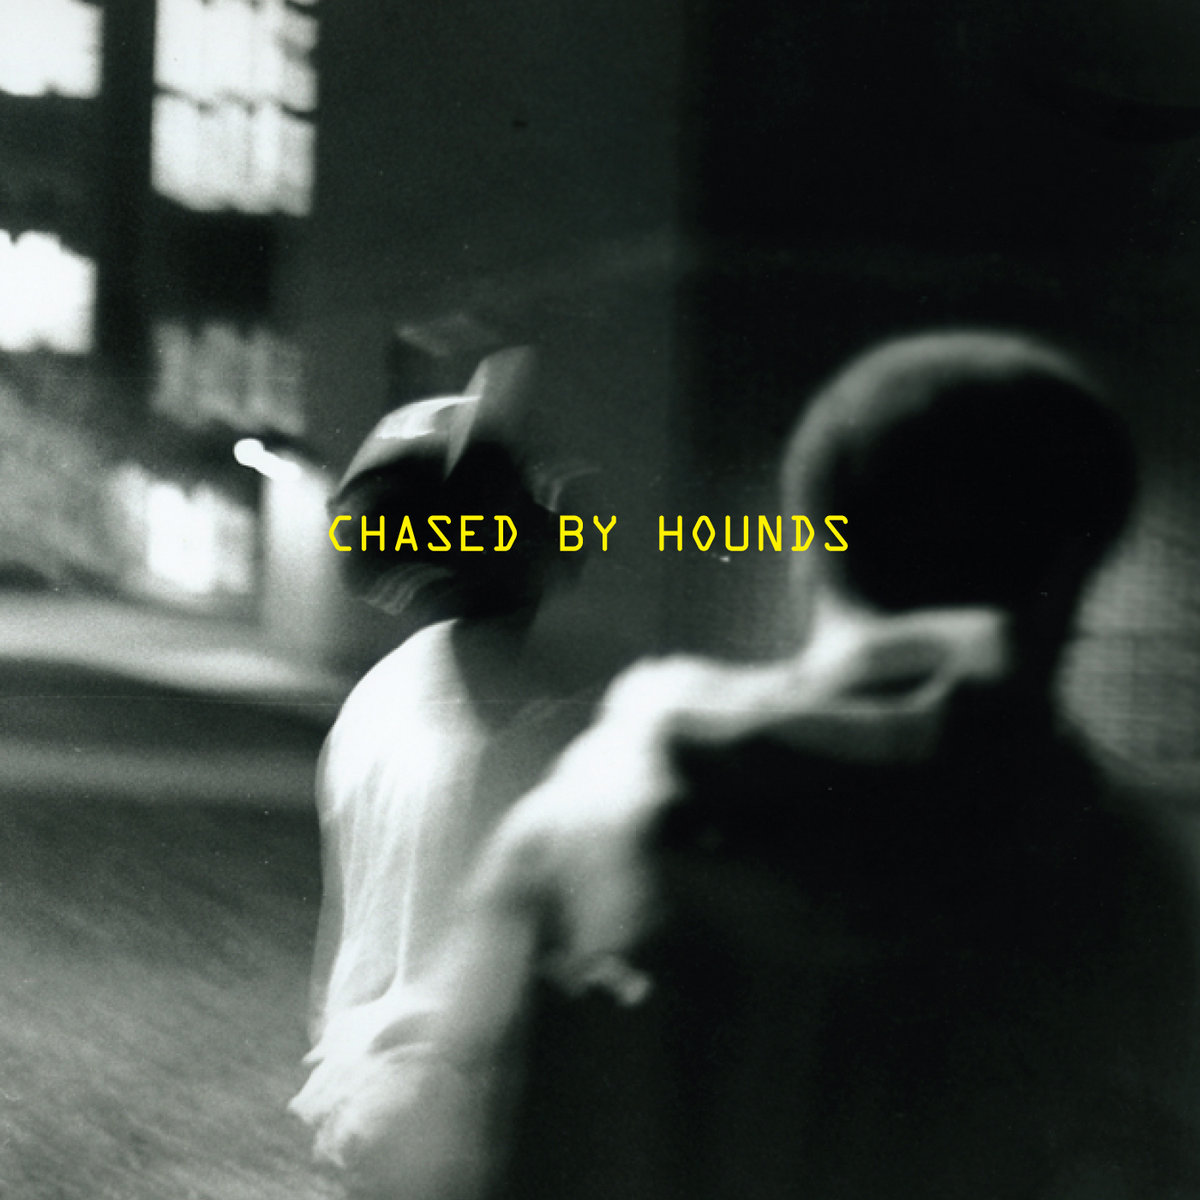 Chased_by_hounds_dj_mastamind